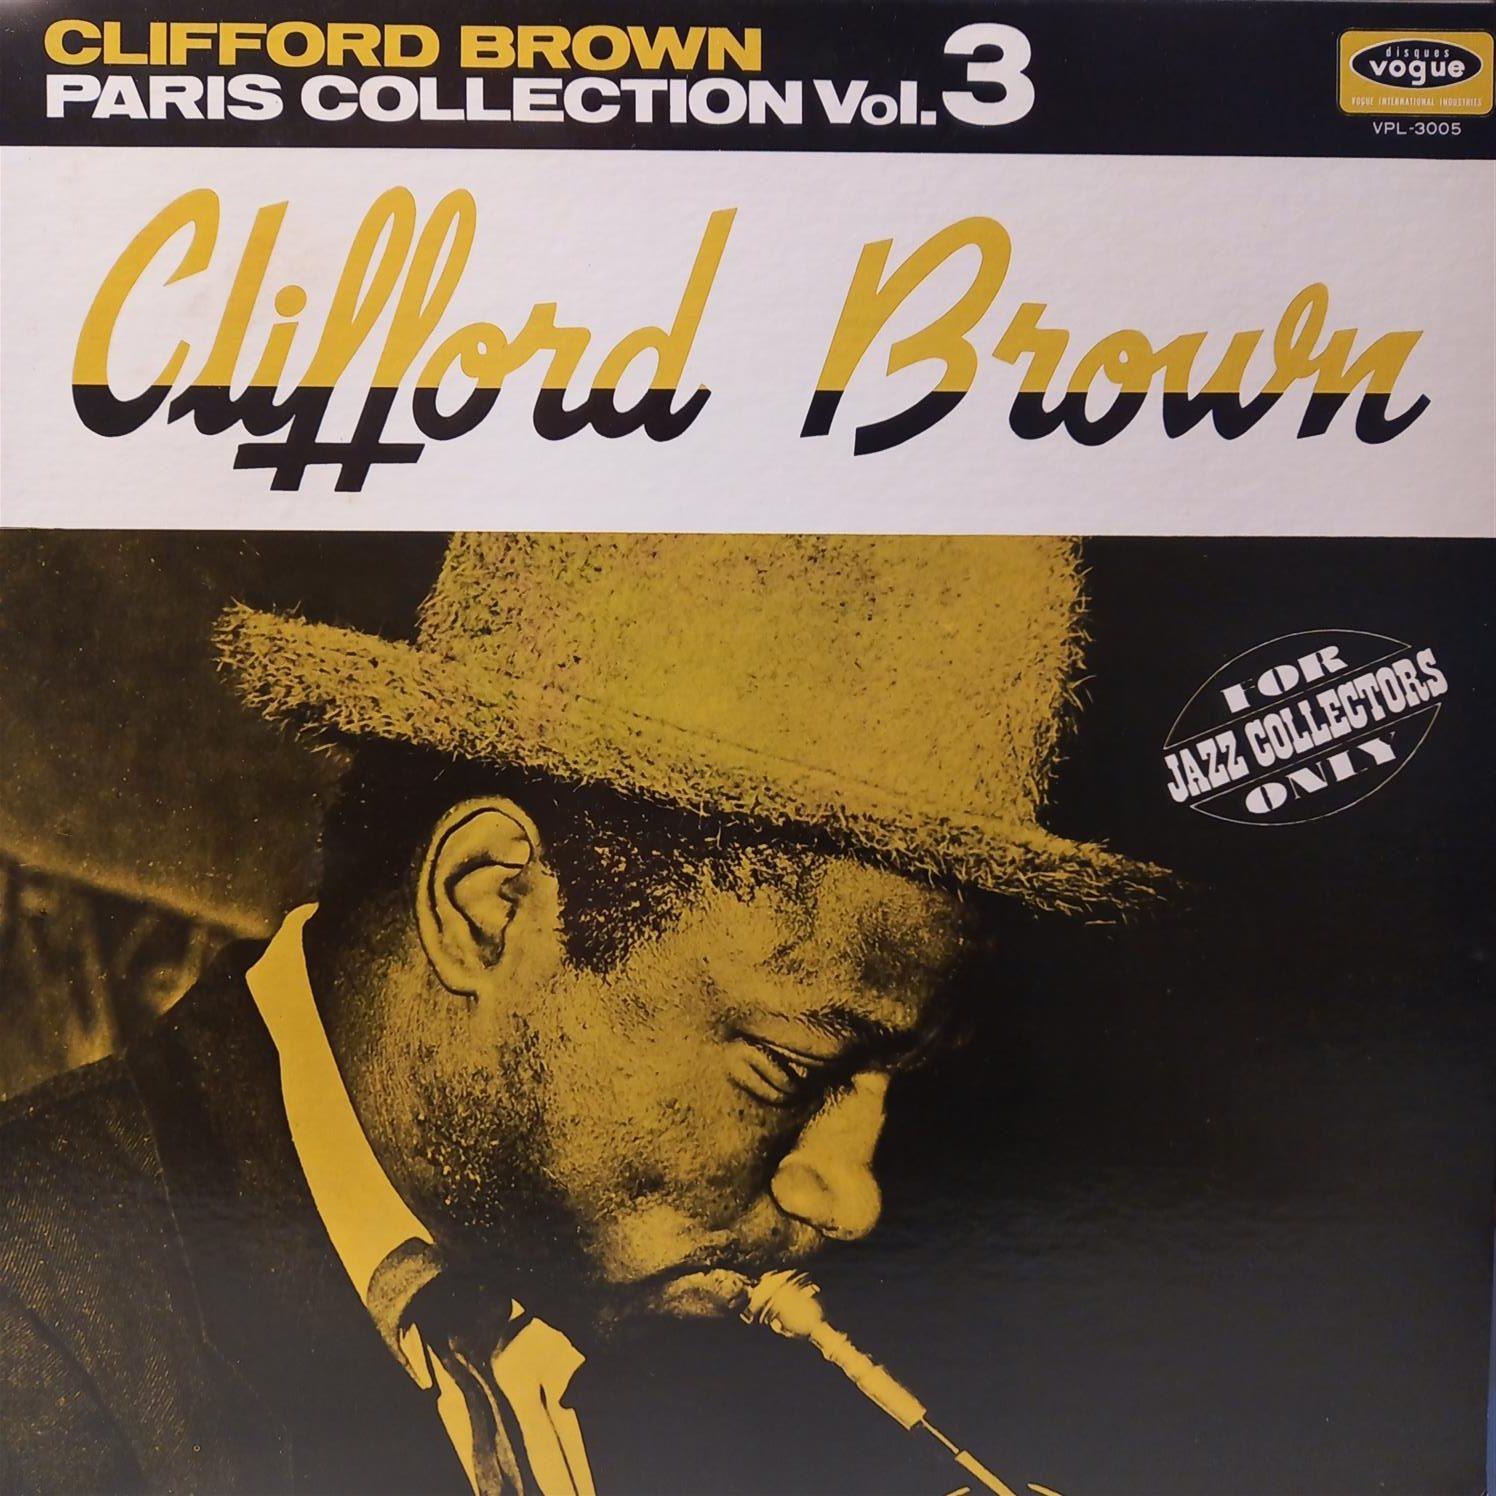 CLIFFORD BROWN – PARIS COLLECTION VOL. 3 ON3